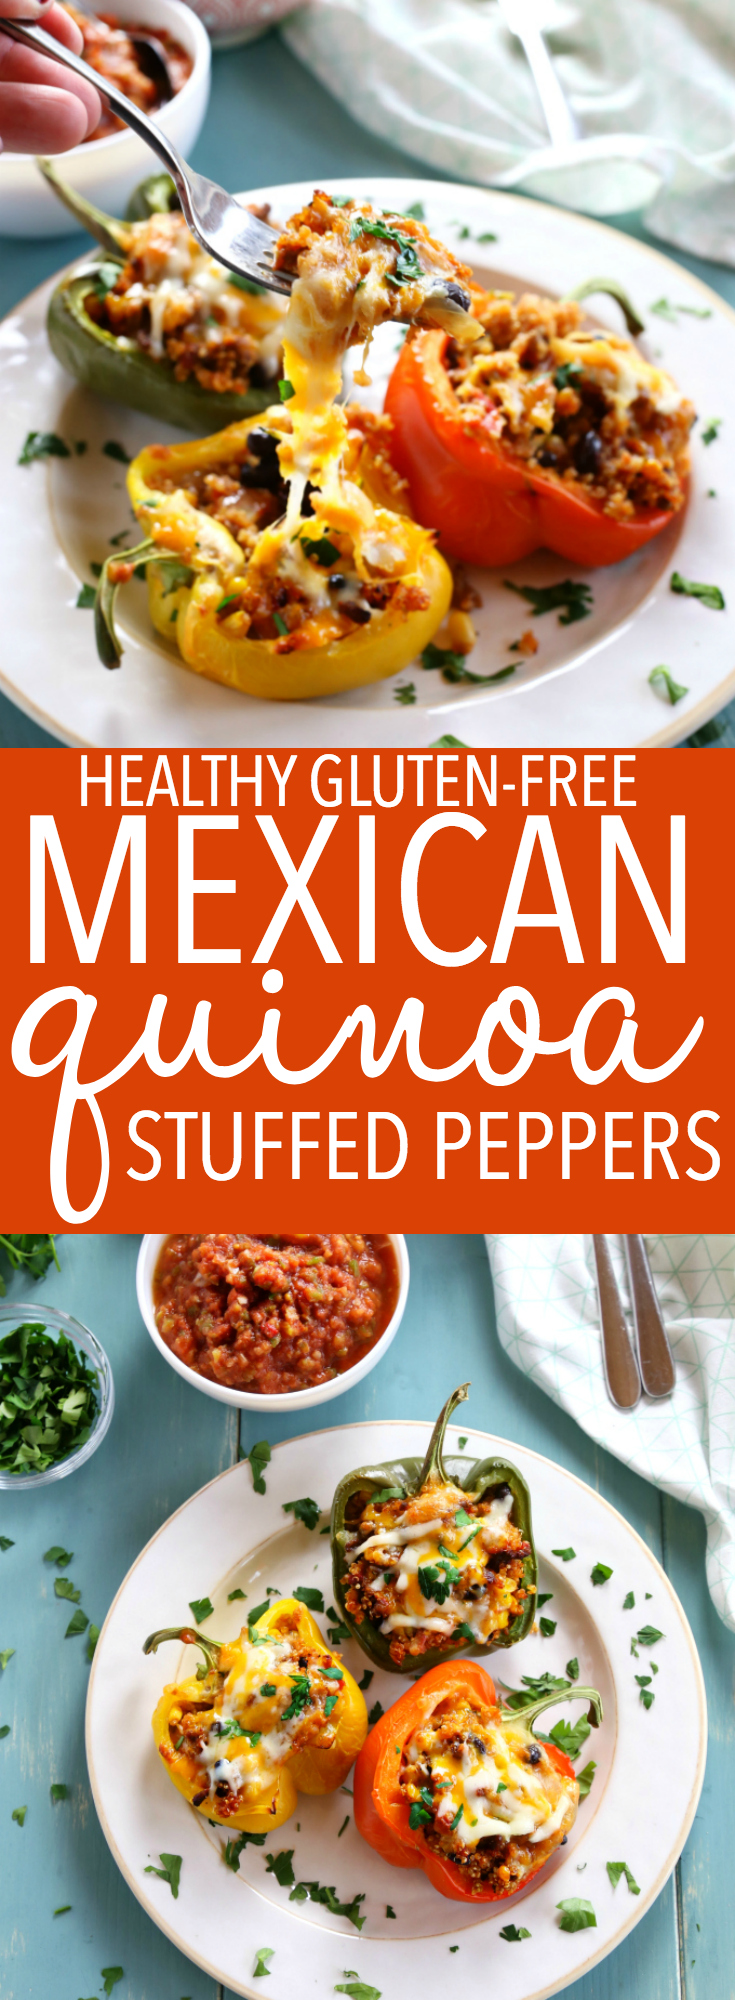 These Mexican-Style Quinoa Stuffed Peppers are the perfect healthy family meal that's naturally gluten-free! These stuffed peppers are bursting with Mexican flavours and packed with veggies and fibre and topped with cheese for a wholesome meal the whole family will love! Recipe from thebusybaker.ca! #mexicanstuffedpeppers #quinoapeppers #glutenfree #glutenfreemeal via @busybakerblog